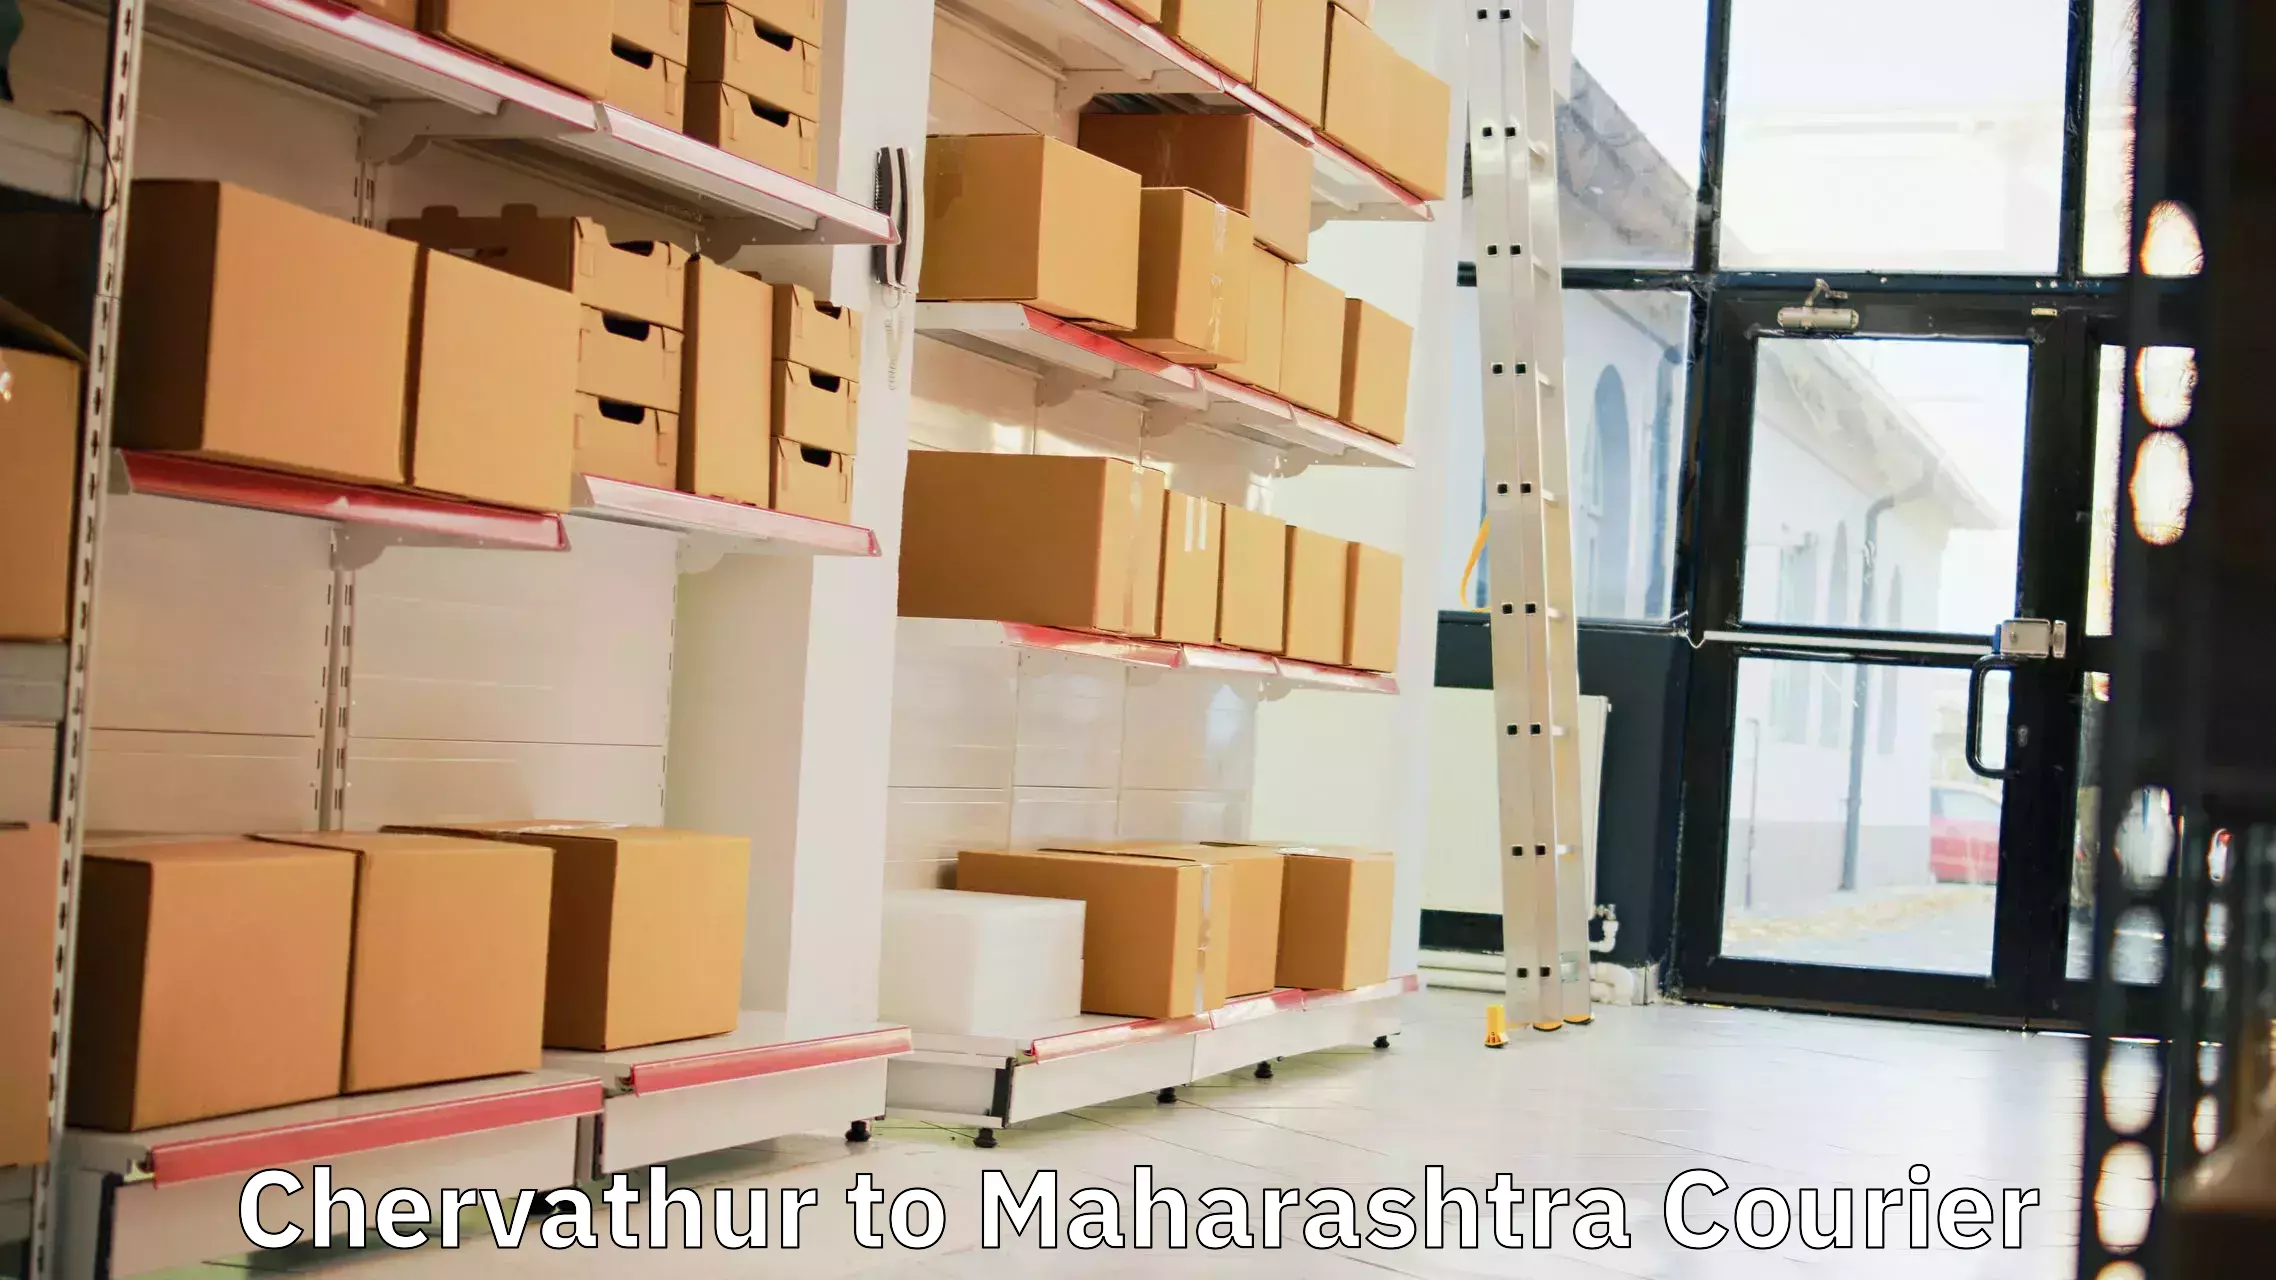 Easy access courier services in Chervathur to Shevgaon